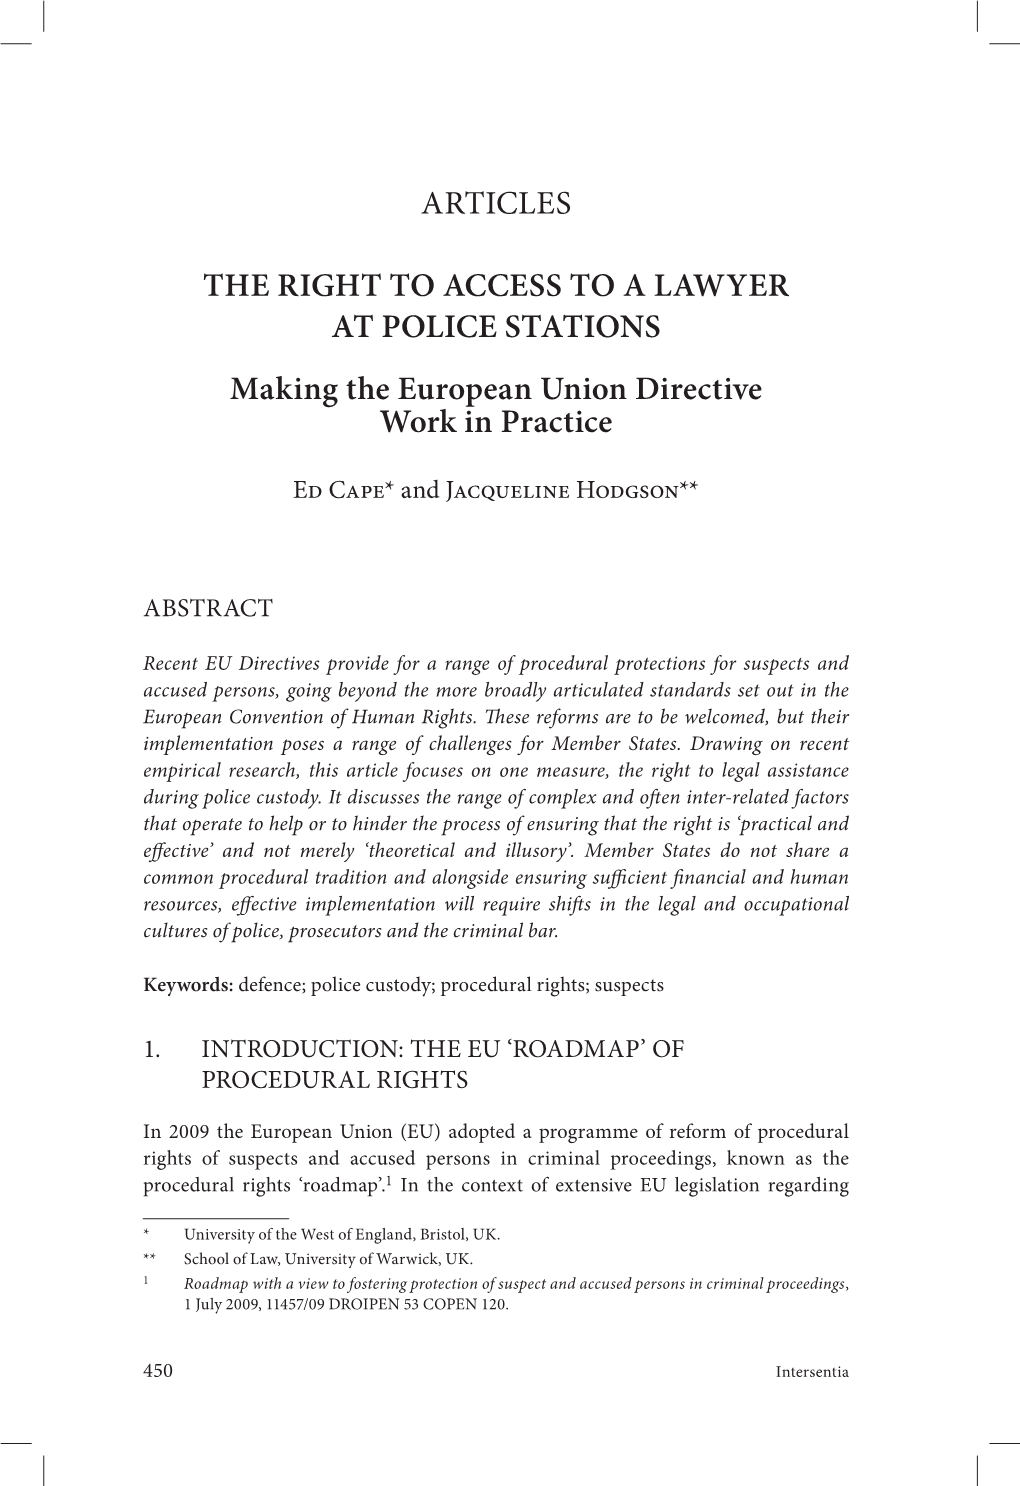 Articles the Right to Access to a Lawyer at Police